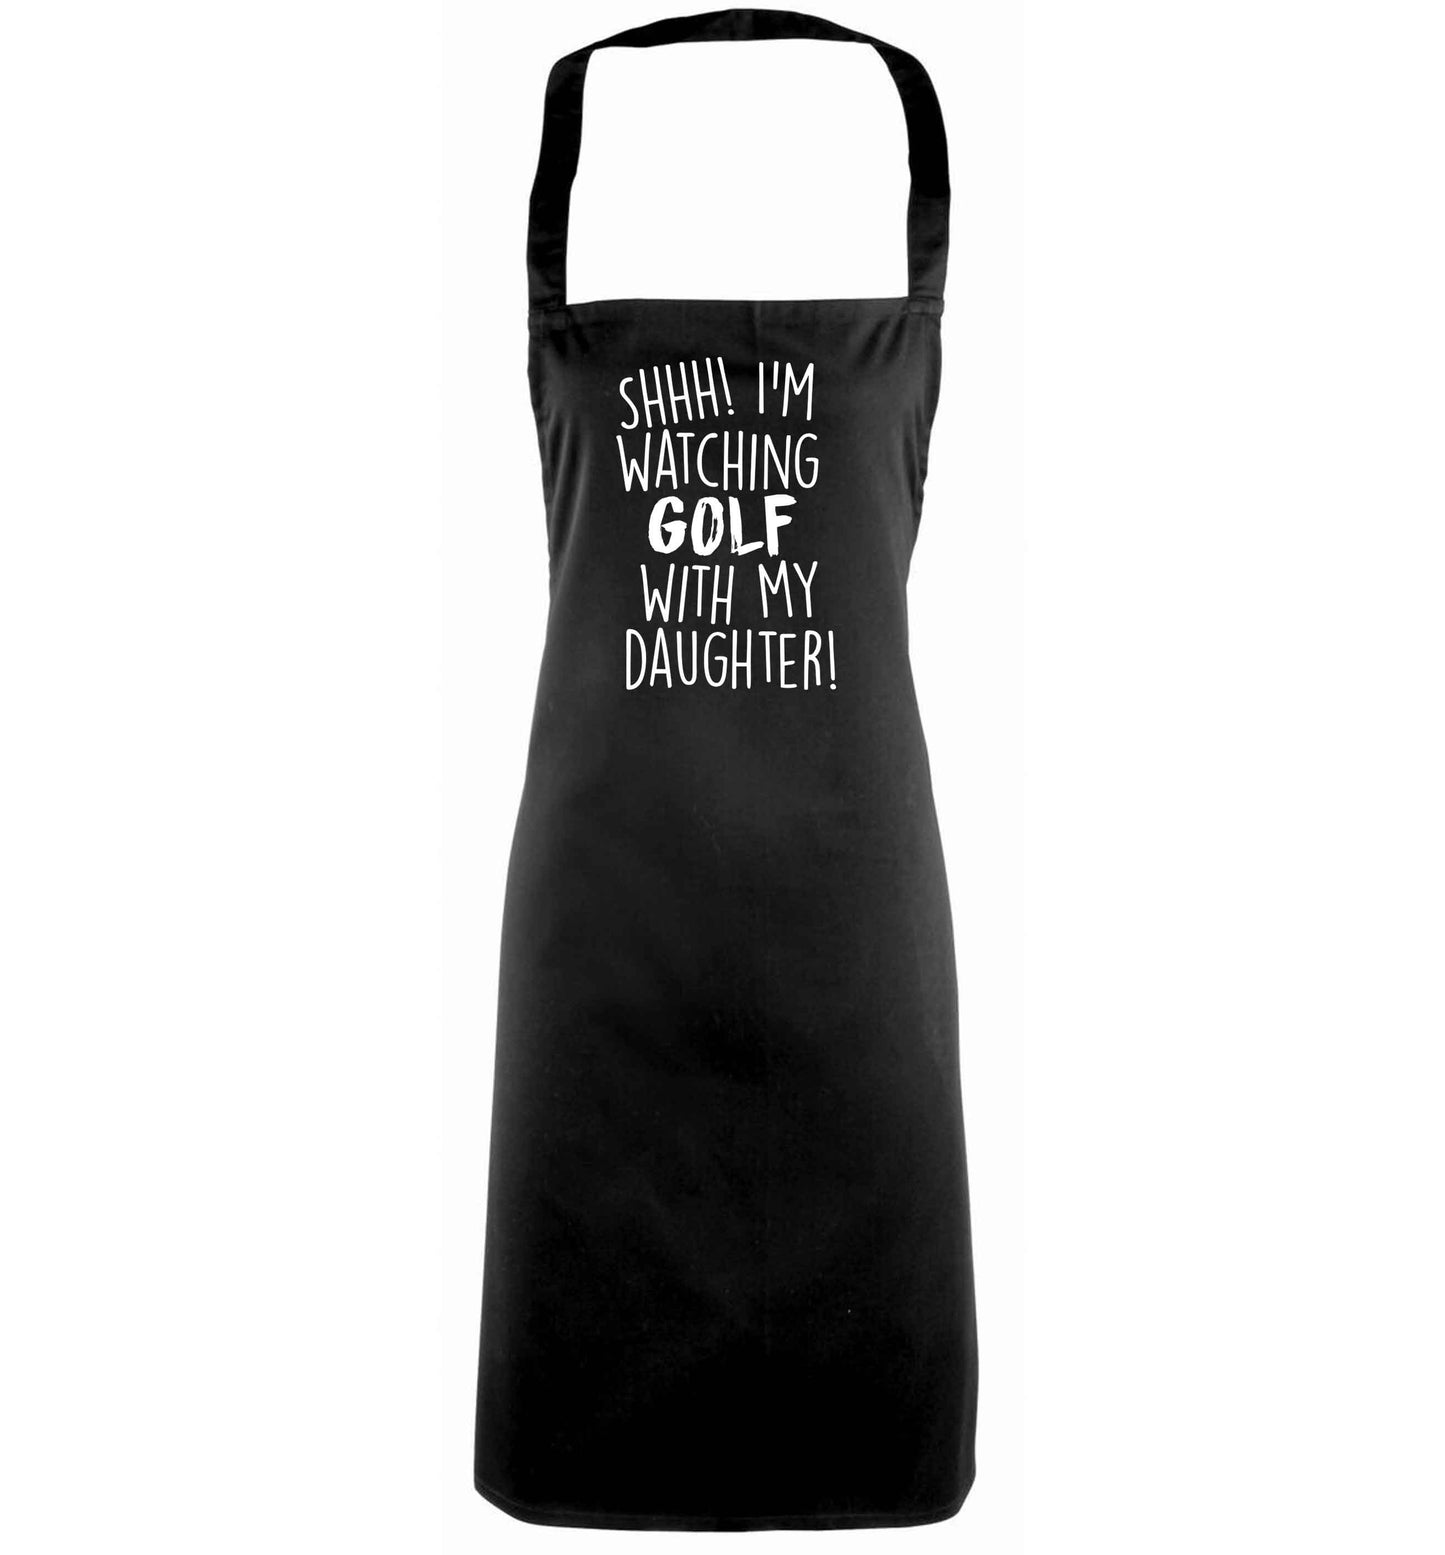 Shh I'm watching golf with my daughter black apron